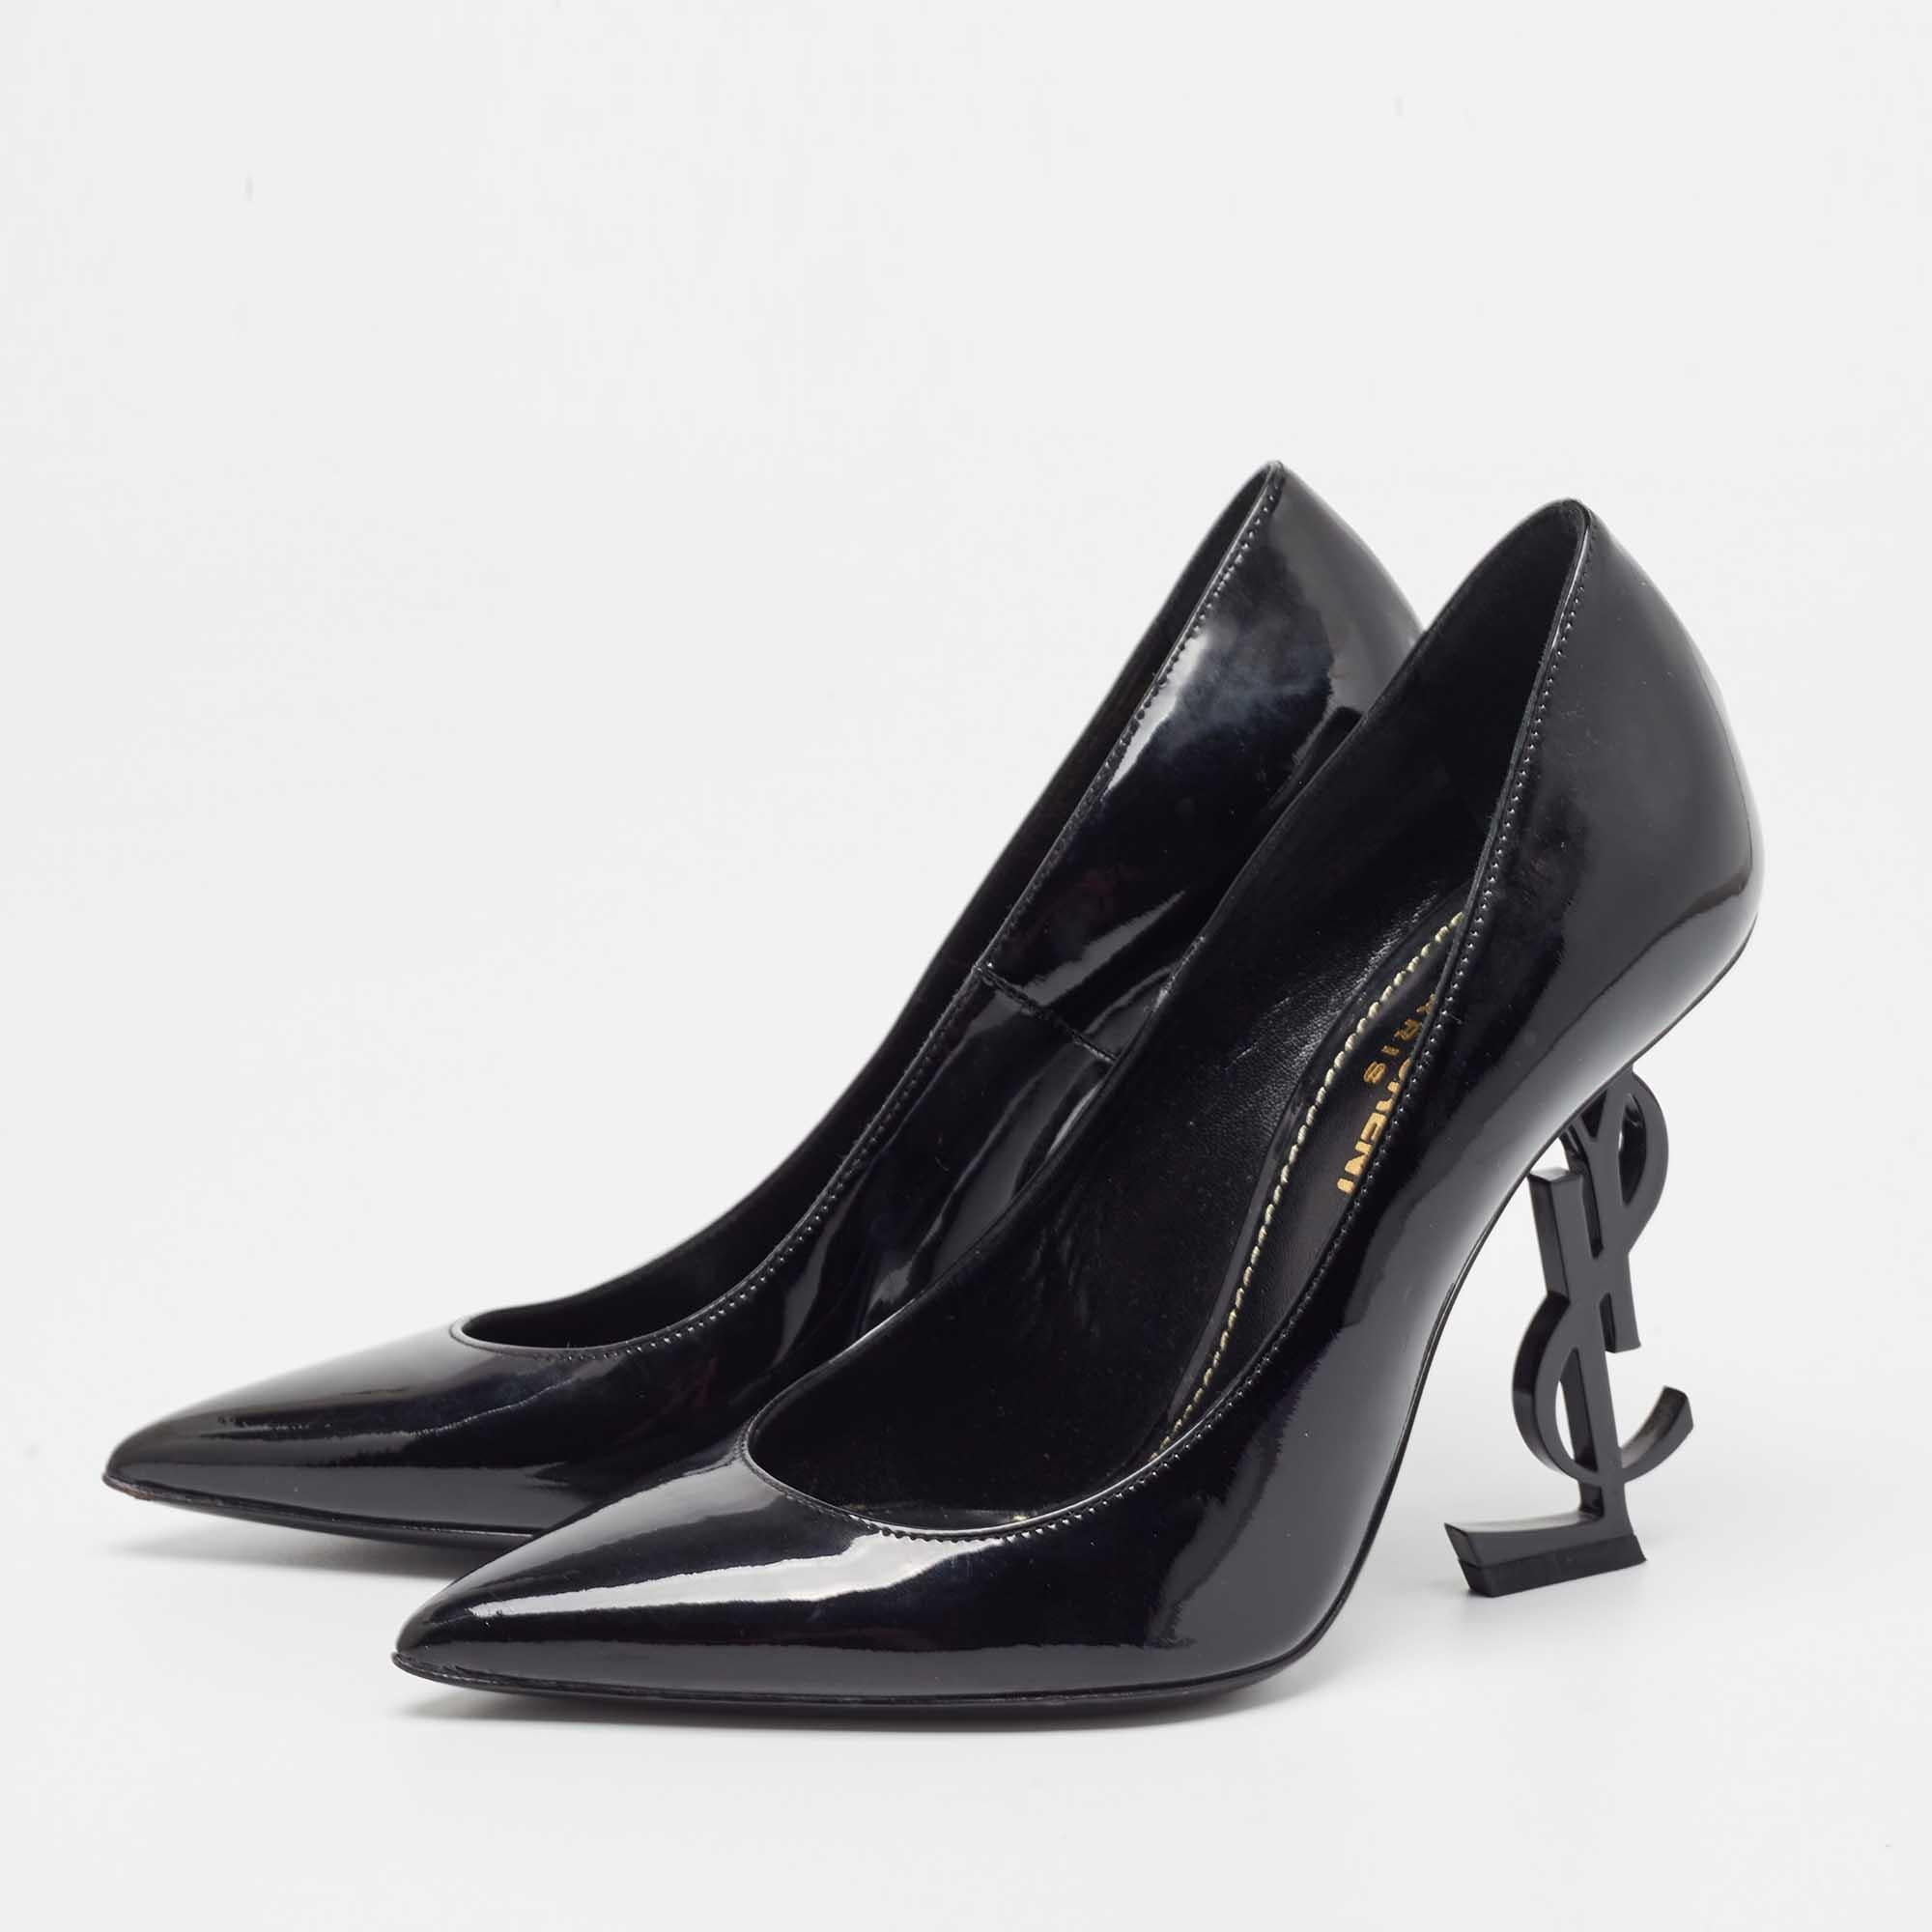 The fashion house’s tradition of excellence, coupled with modern design sensibilities, works to make these YSL pumps a fabulous choice. They'll help you deliver a chic look with ease.

